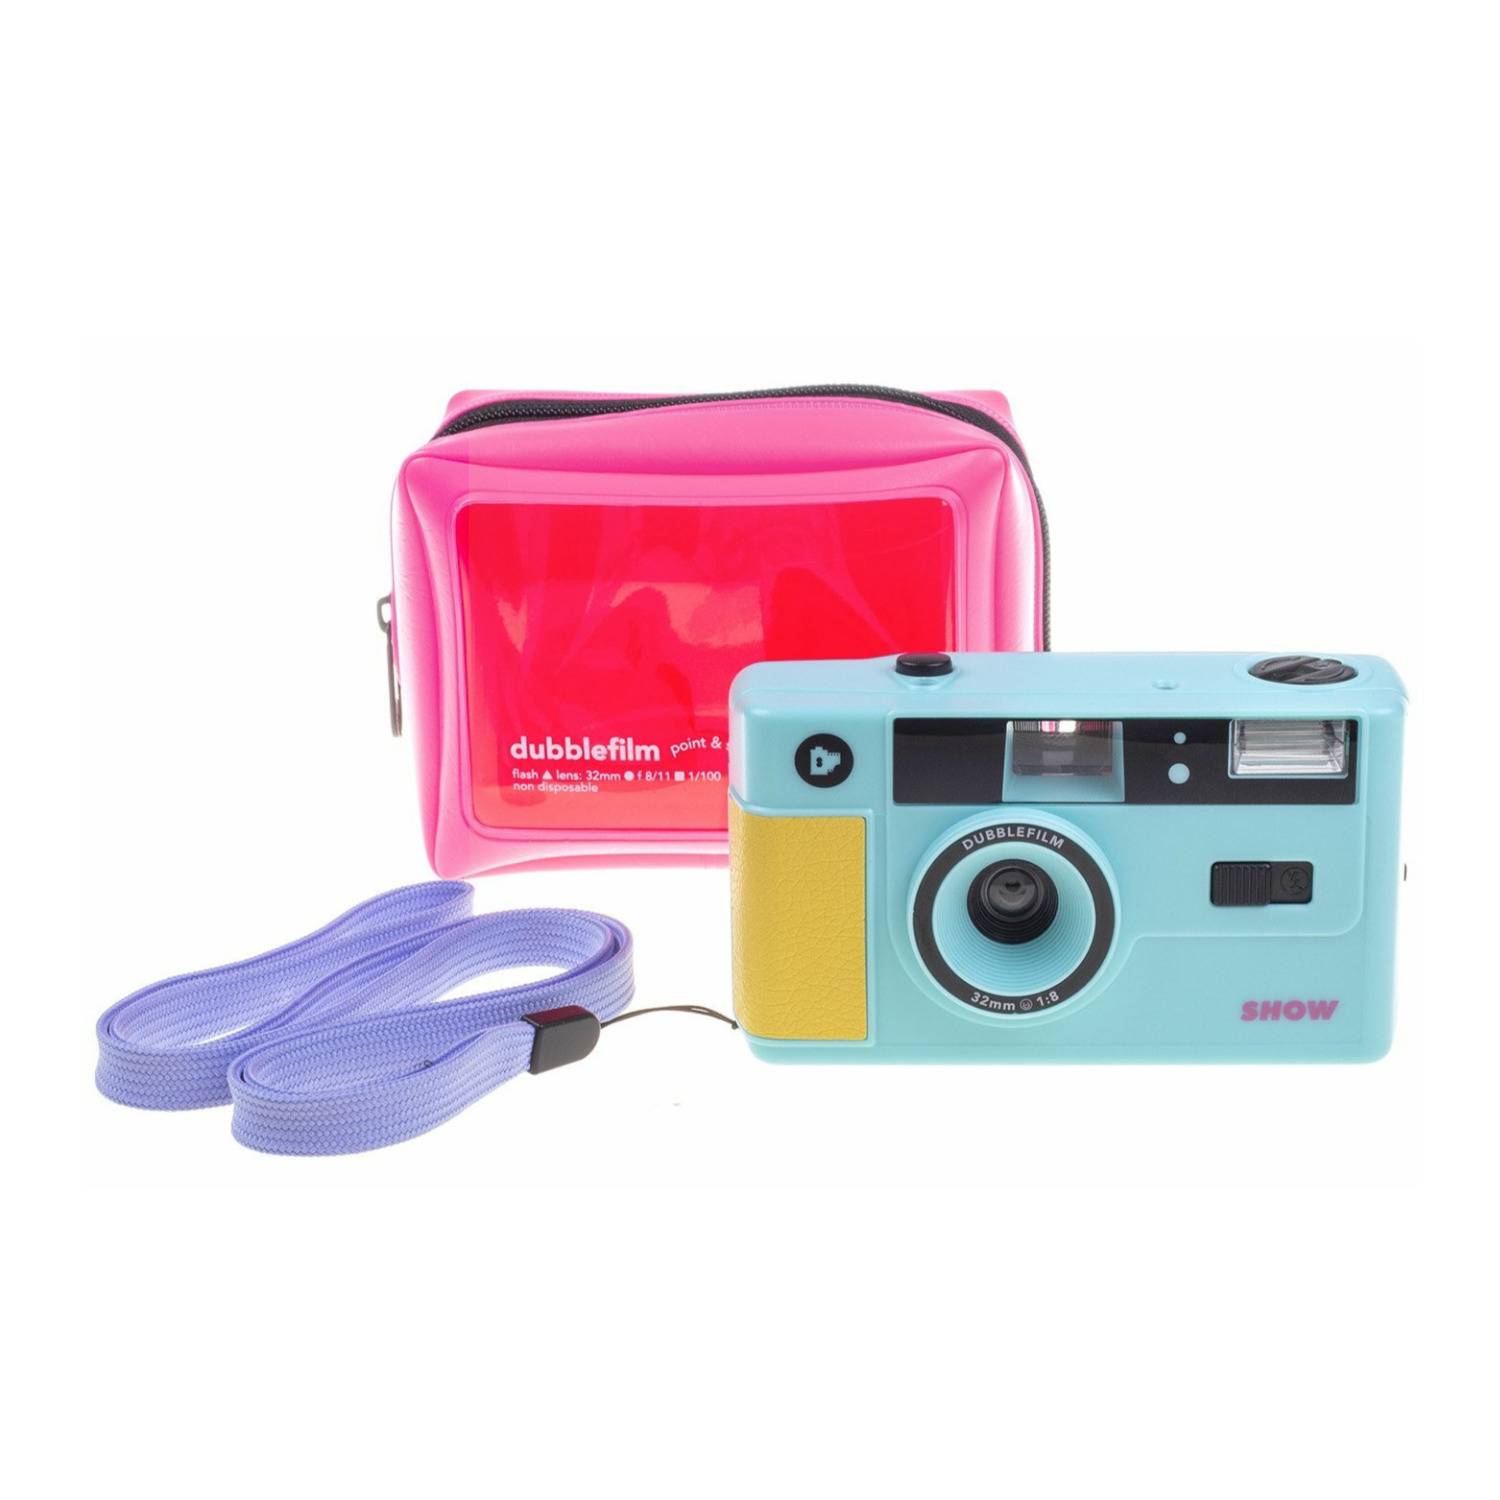 dubblefilm SHOW Reusable 35mm Film Camera with Flash (Turquoise)